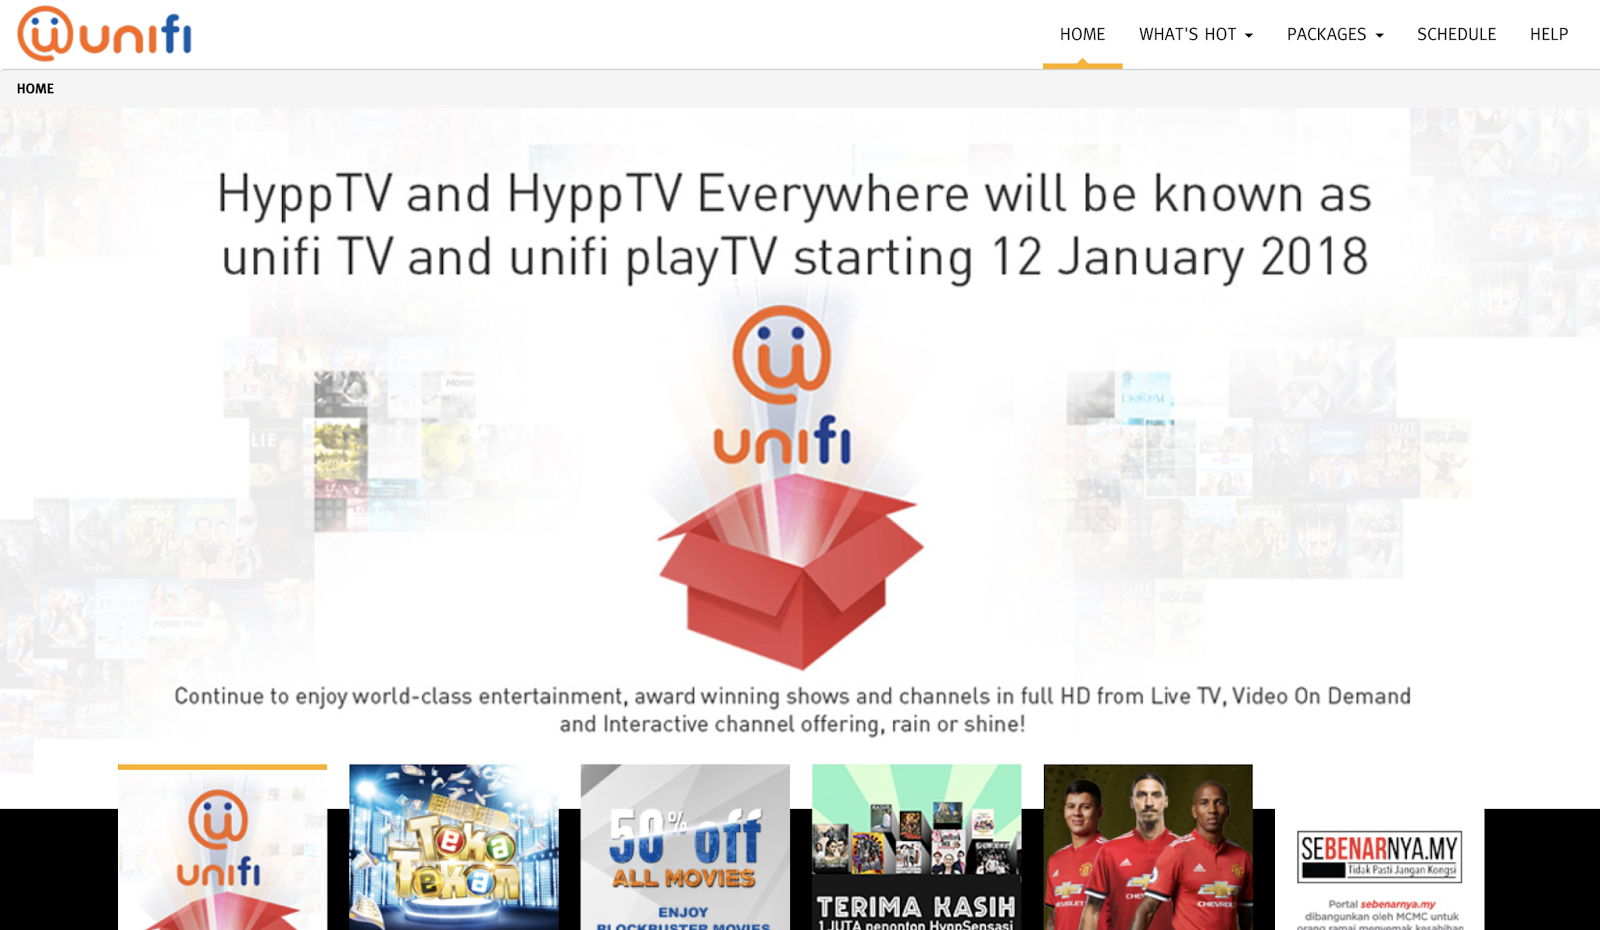 Sara Wanderlust unifi Perfects Coverage unifi Mobile and 1st live Interactive show